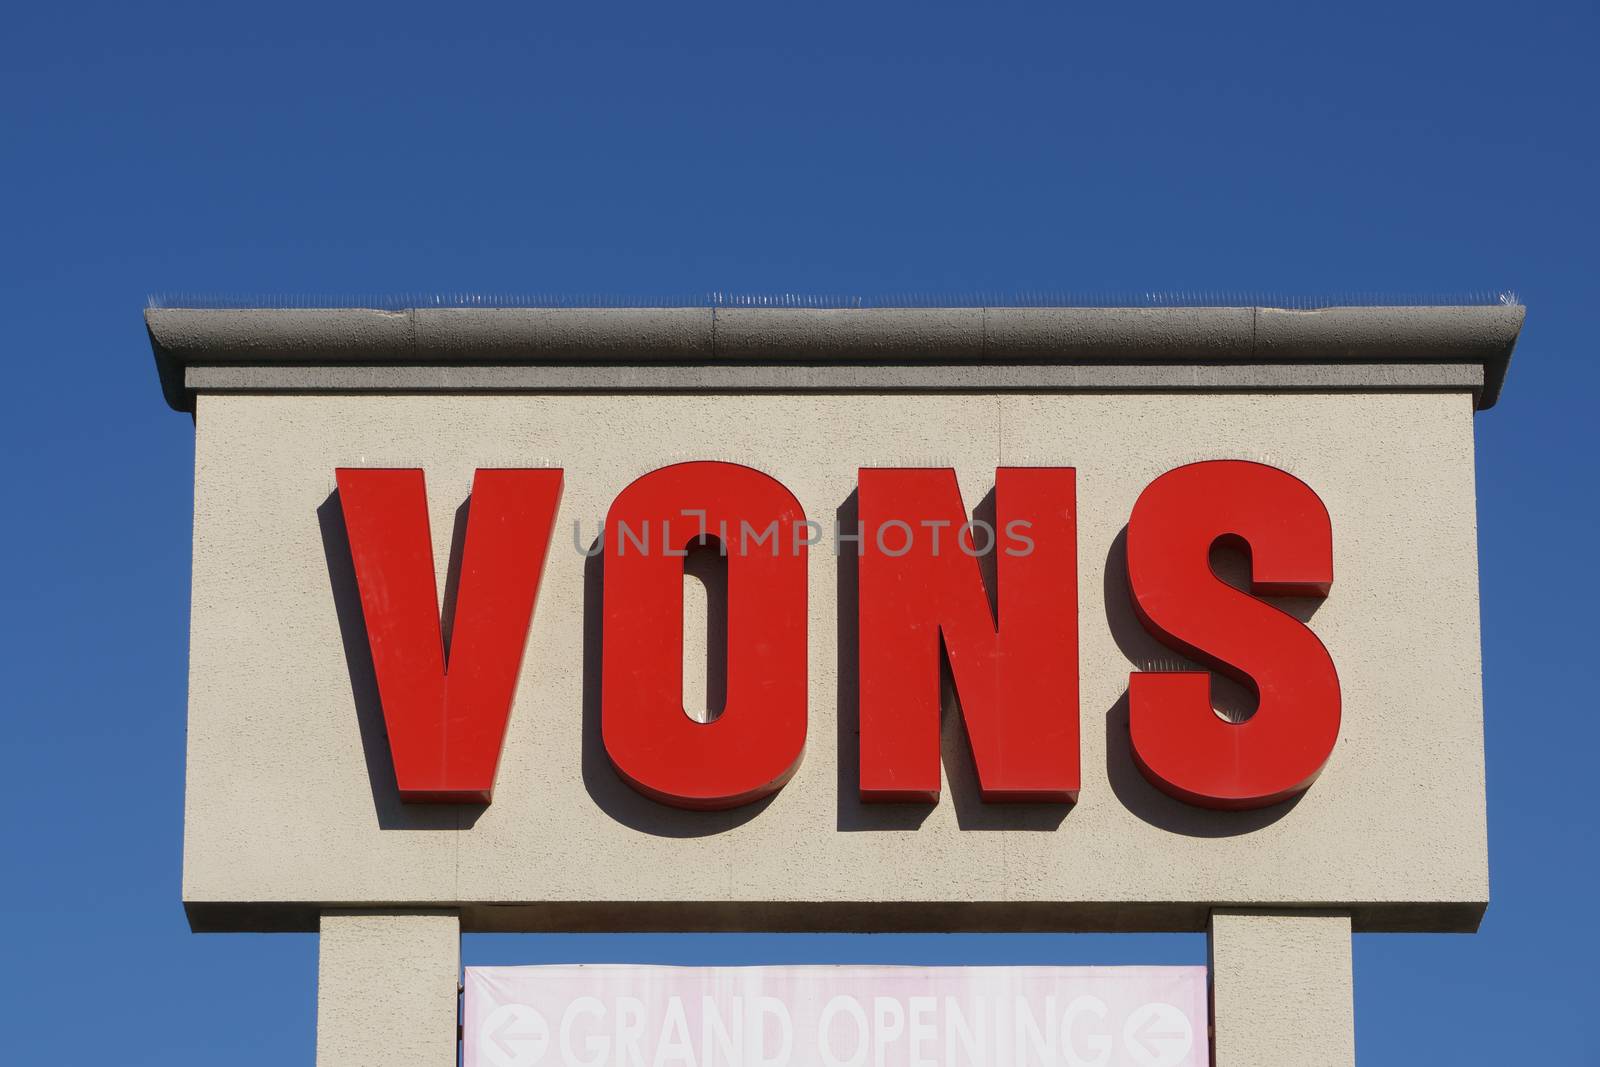 WEST HILLS, CA/USA - DECEMBER 31, 2015: Vons Grocery store sign and logo. Vons is a supermarket chain and a division of Safeway, Inc.